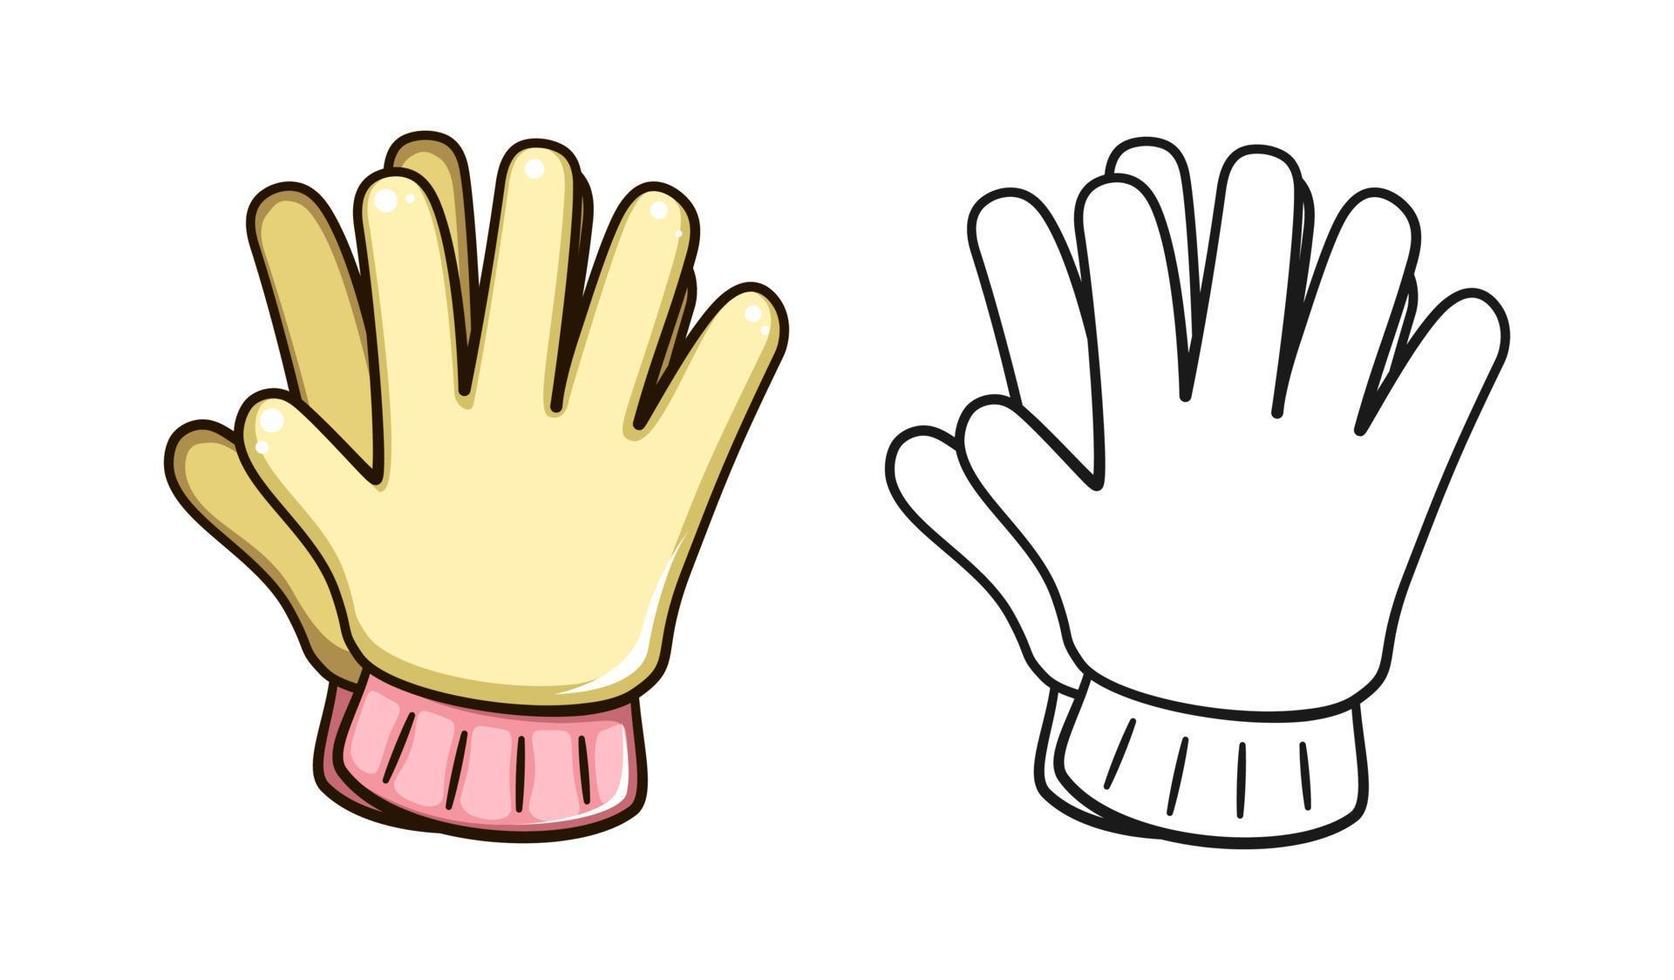 https://static.vecteezy.com/system/resources/previews/015/697/115/non_2x/gardening-rubber-gloves-cute-cartoon-outline-line-art-illustration-gardening-farming-agriculture-coloring-book-page-activity-worksheet-for-kids-vector.jpg